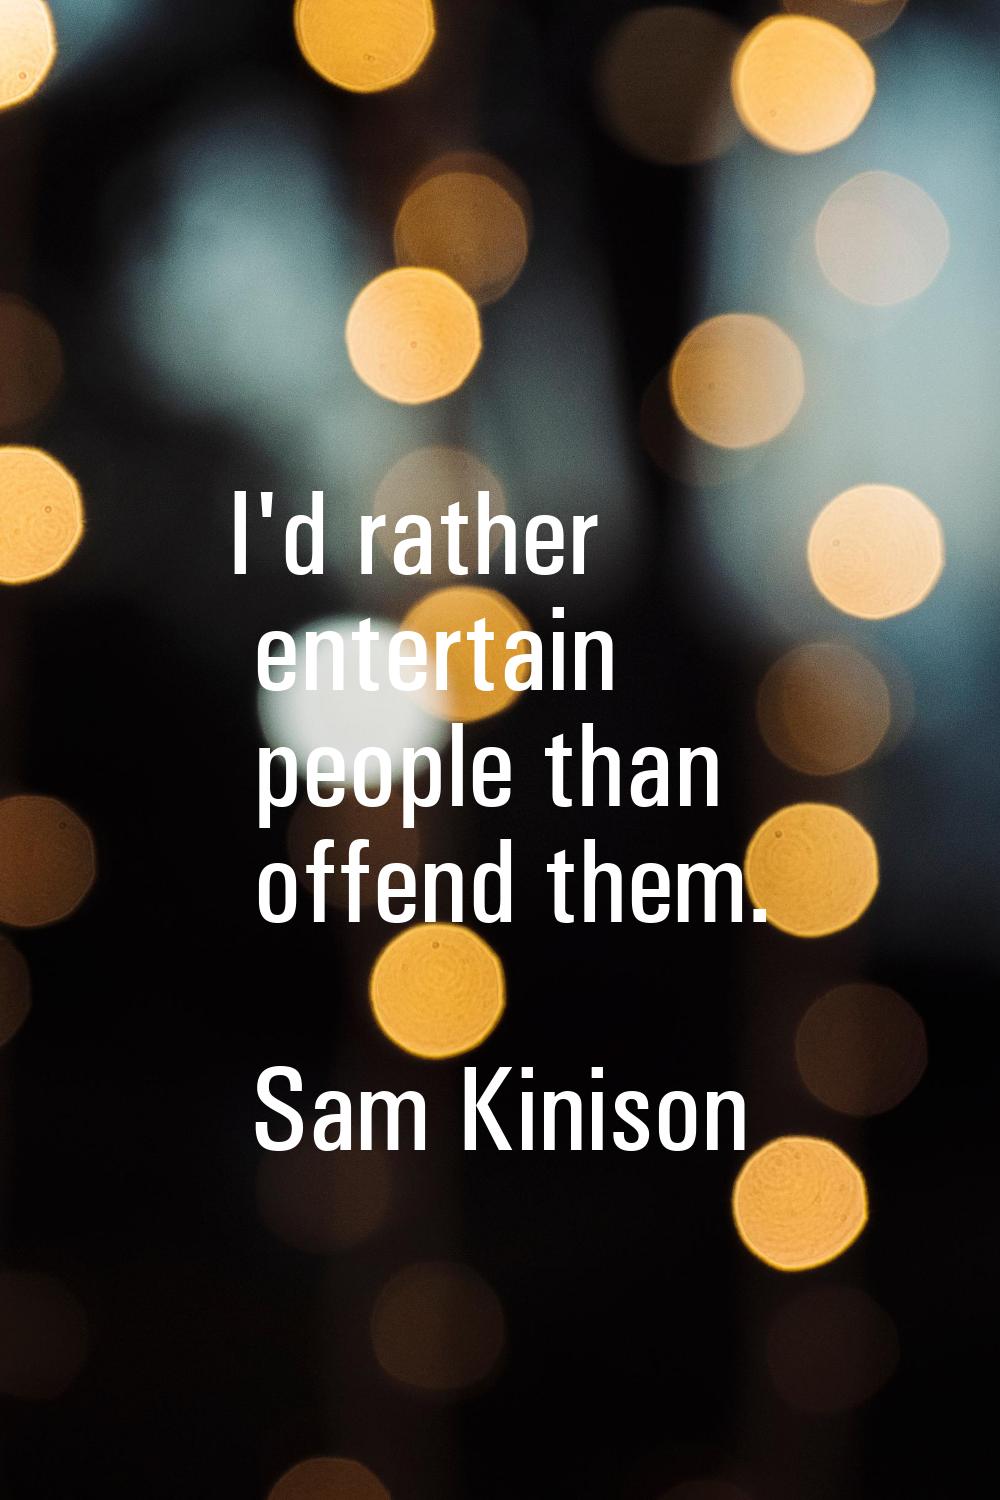 I'd rather entertain people than offend them.